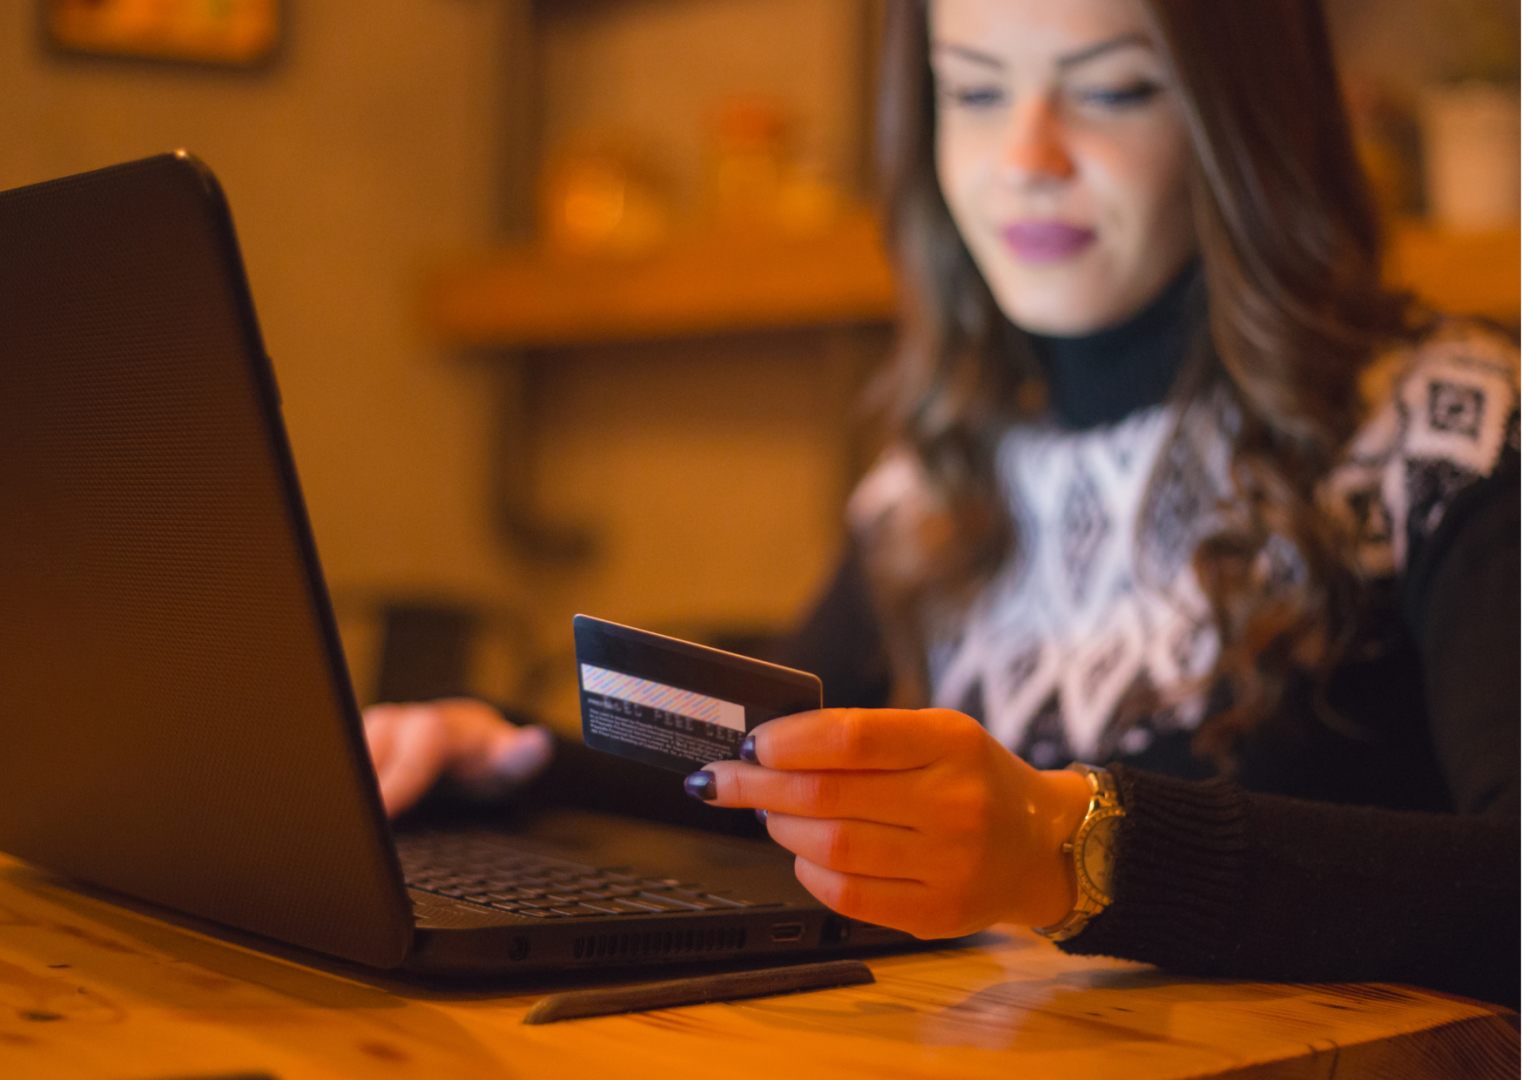 Women looking at laptop holding credit card